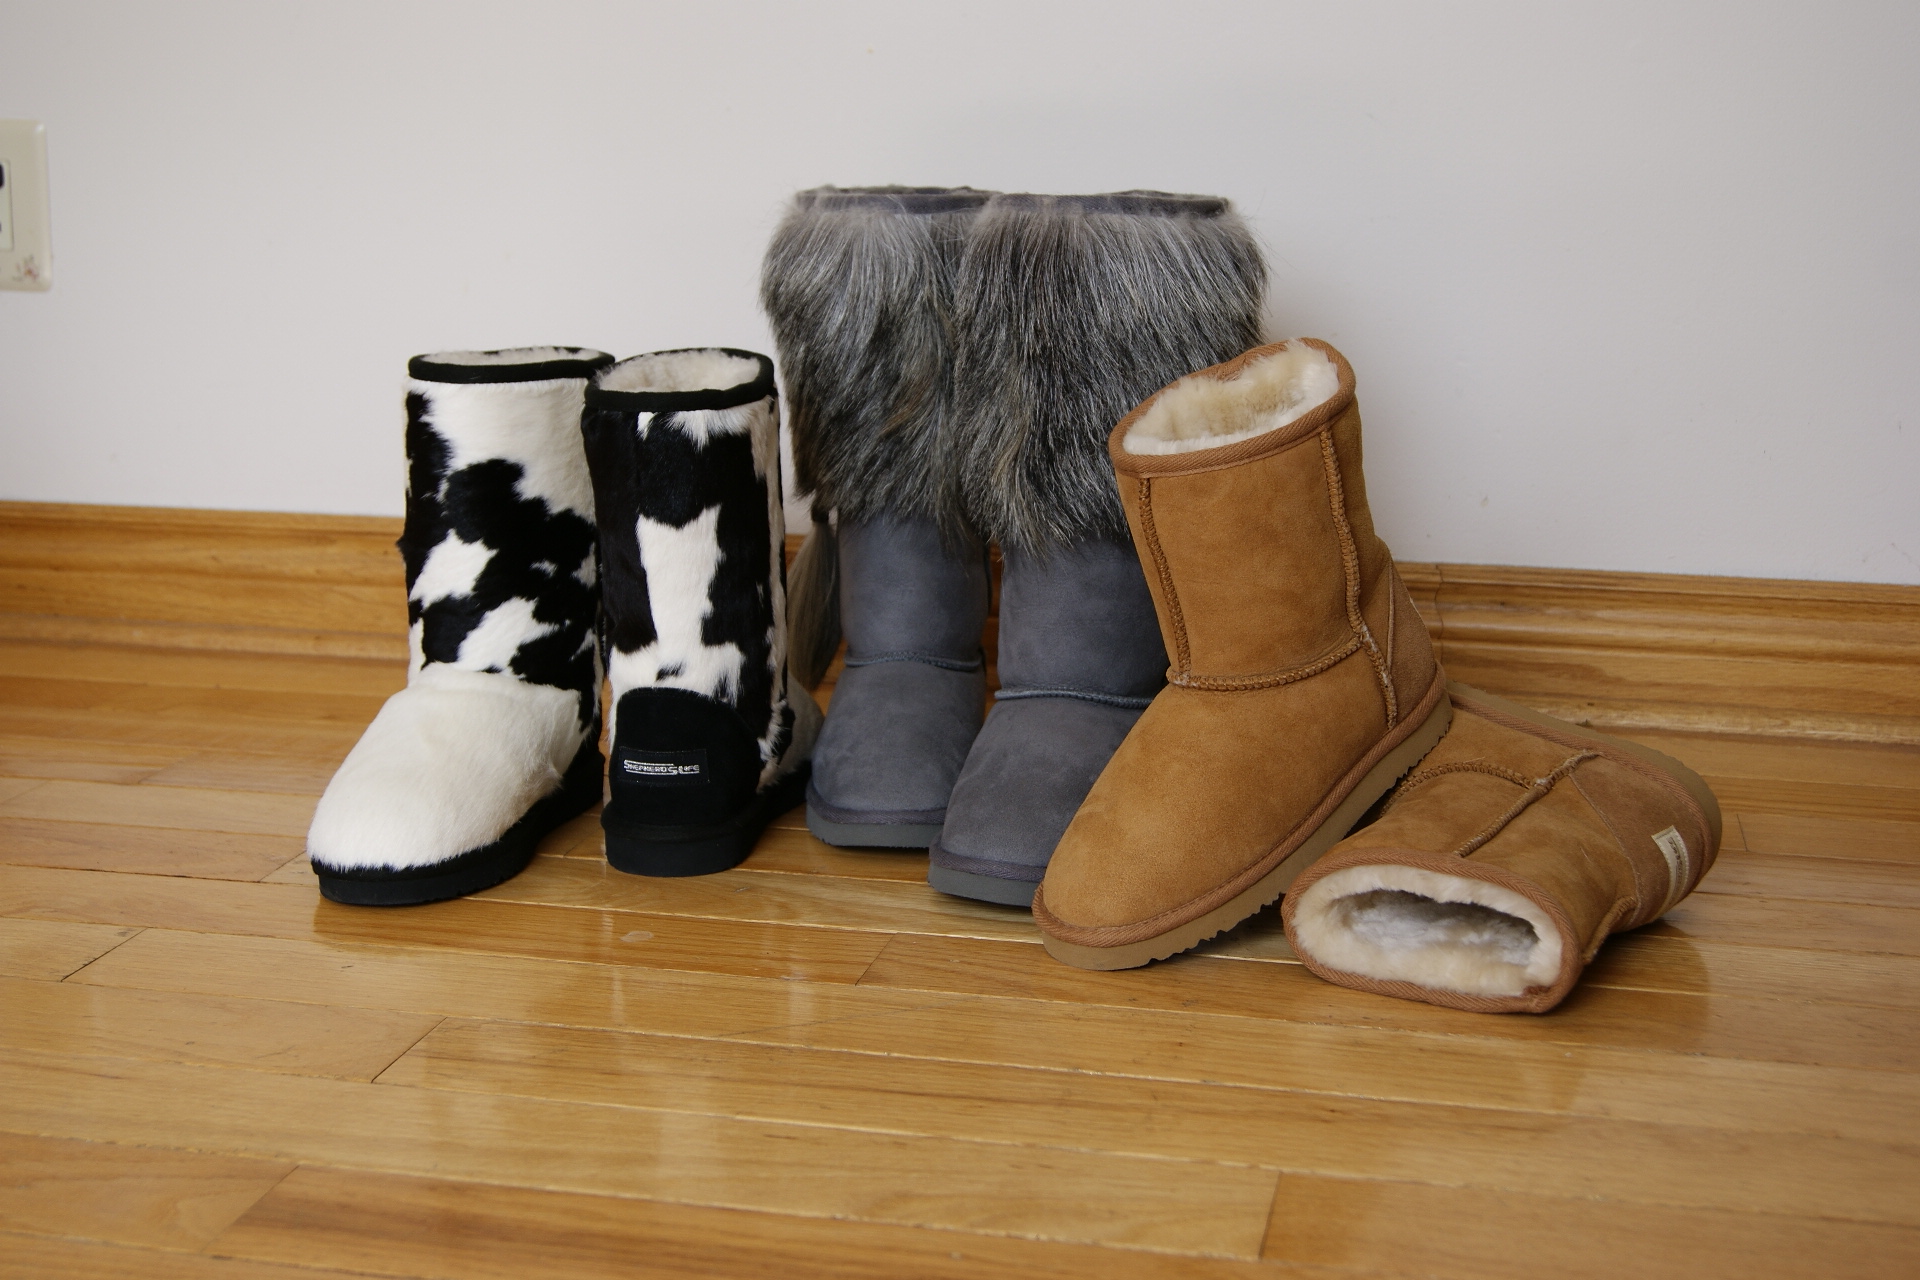 official ugg boots history